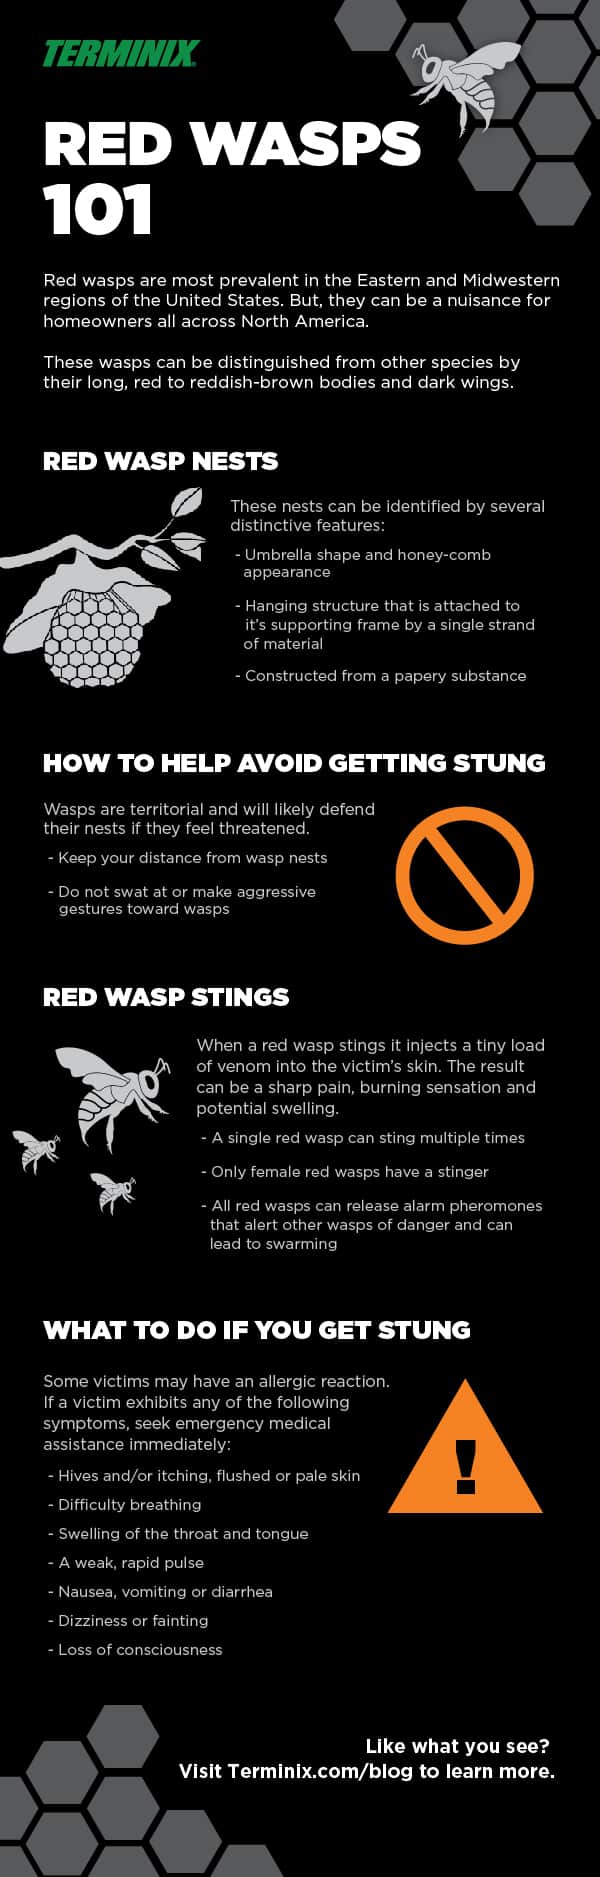 red wasp infographic